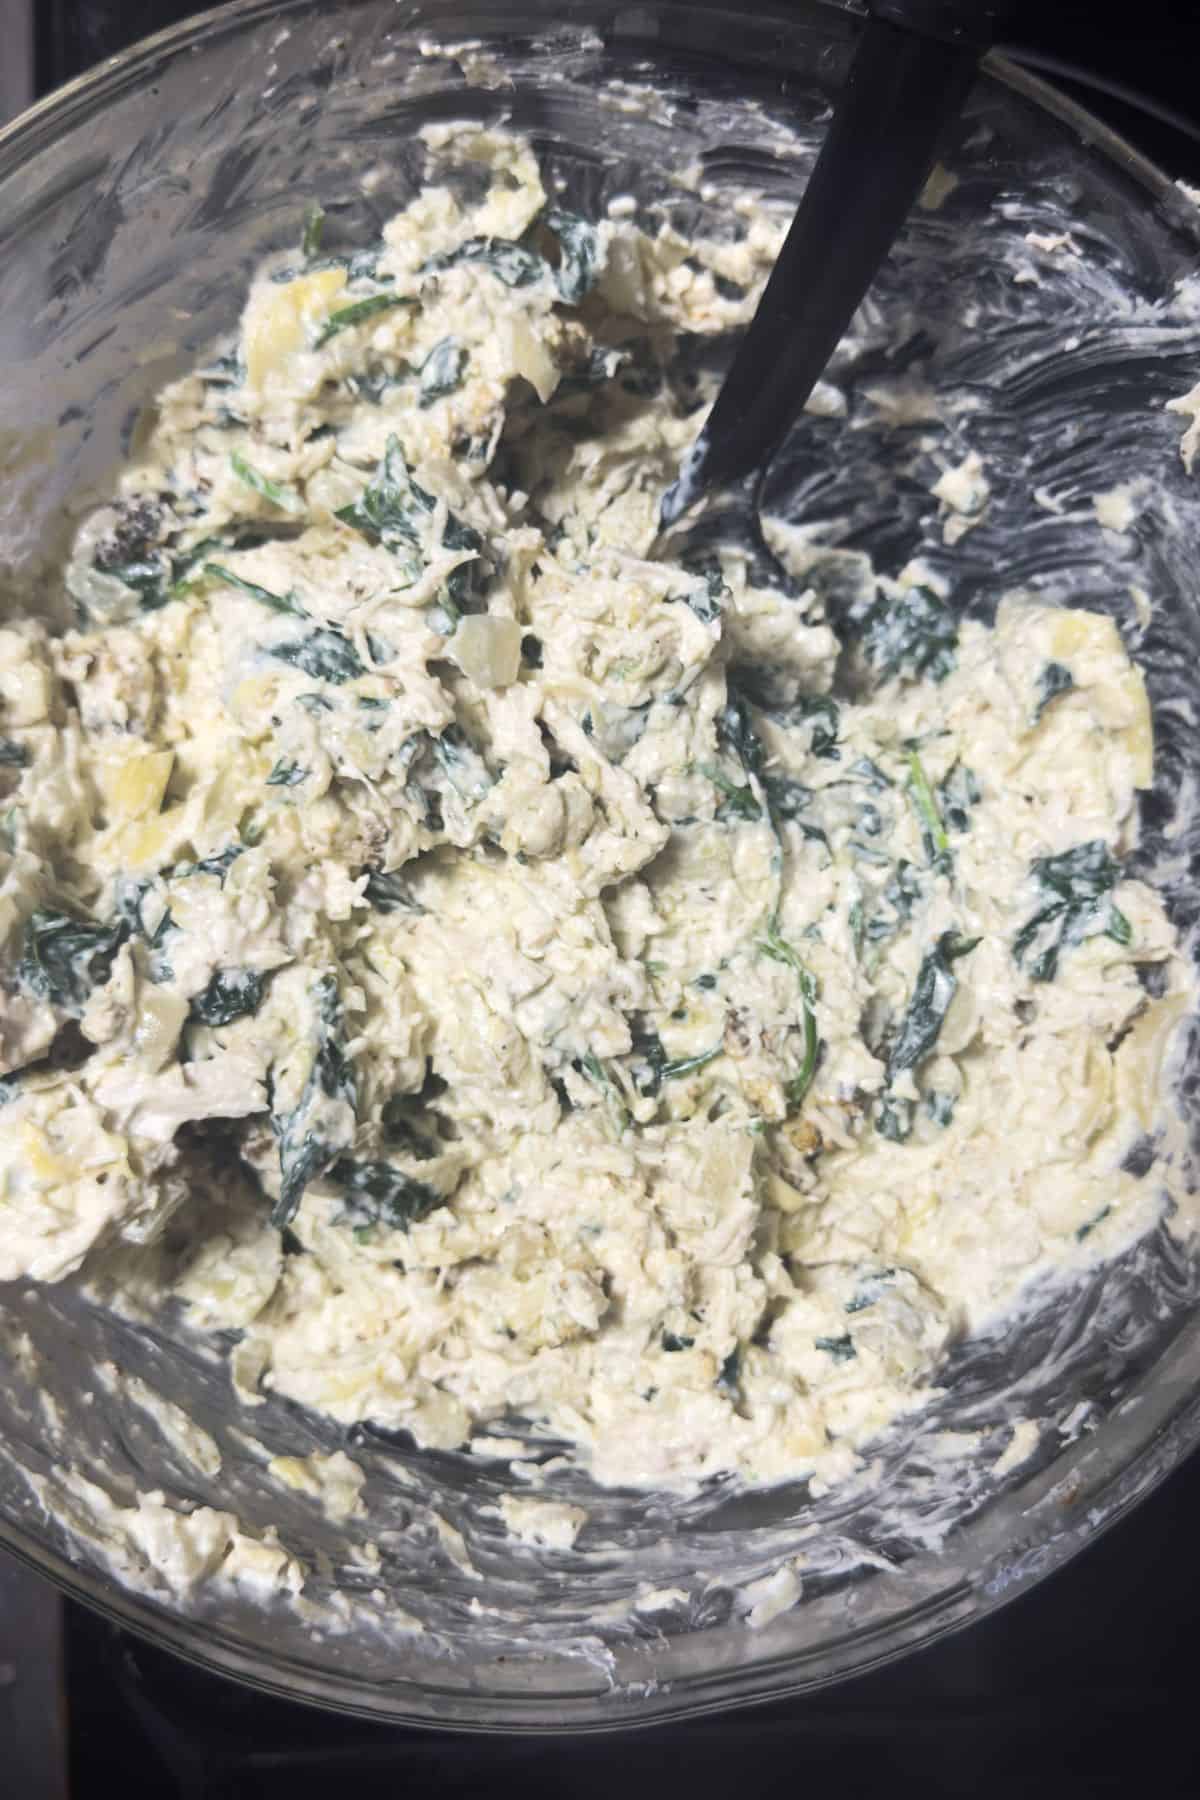 A large mixing bowl with the creamy, cheesy spinach and artichoke mixture, ready to be layered into the casserole dish.